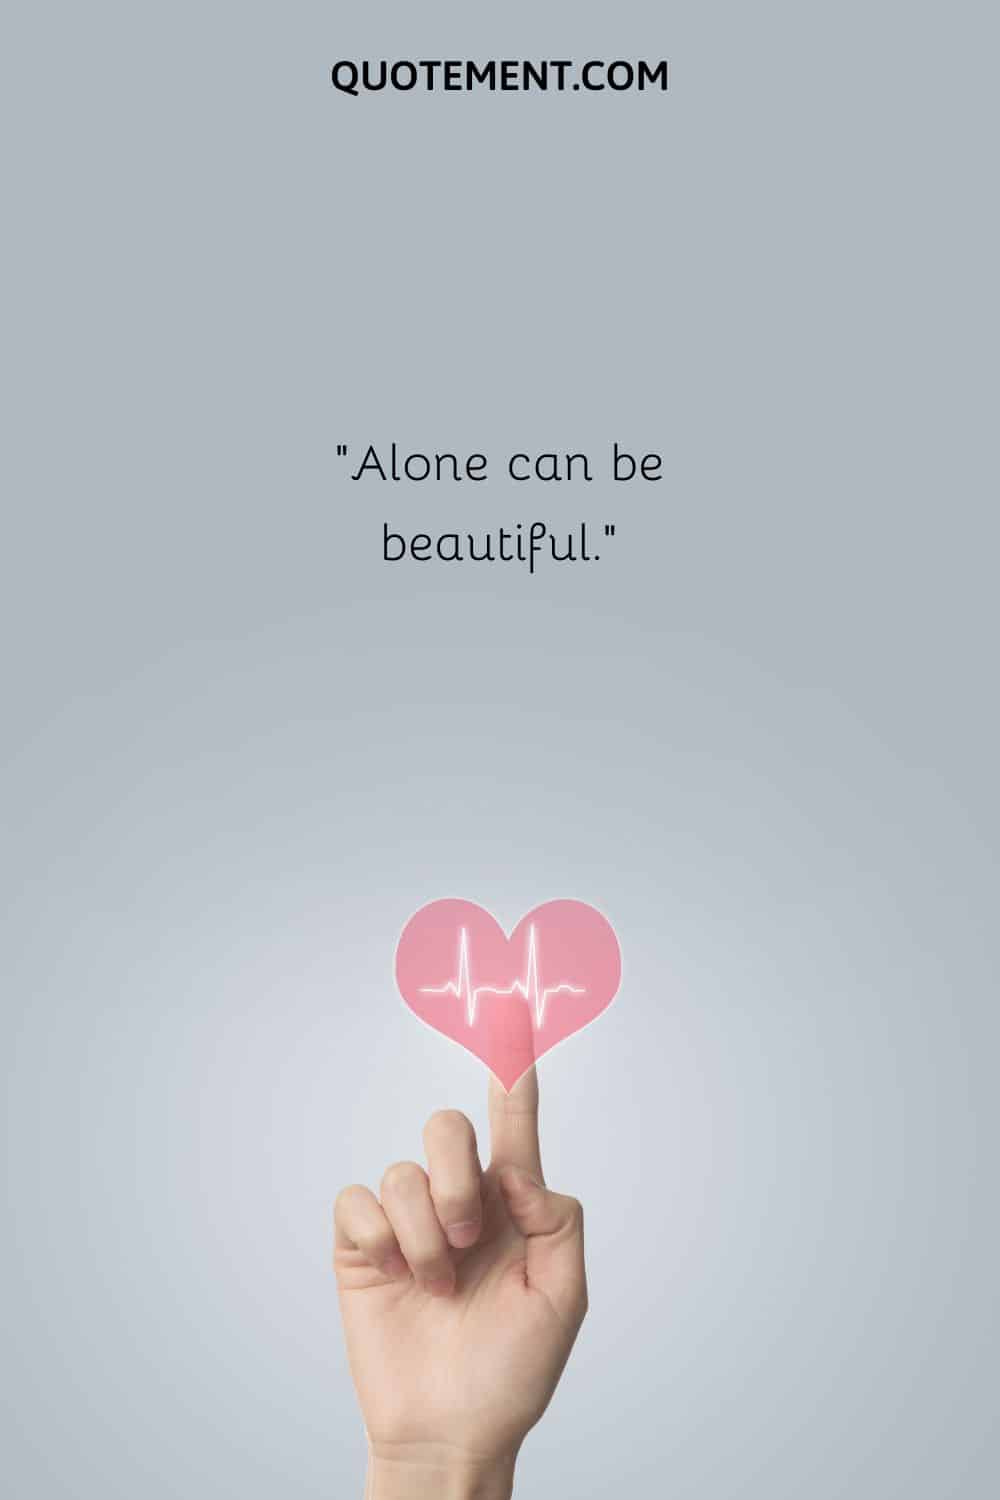 Alone can be beautiful